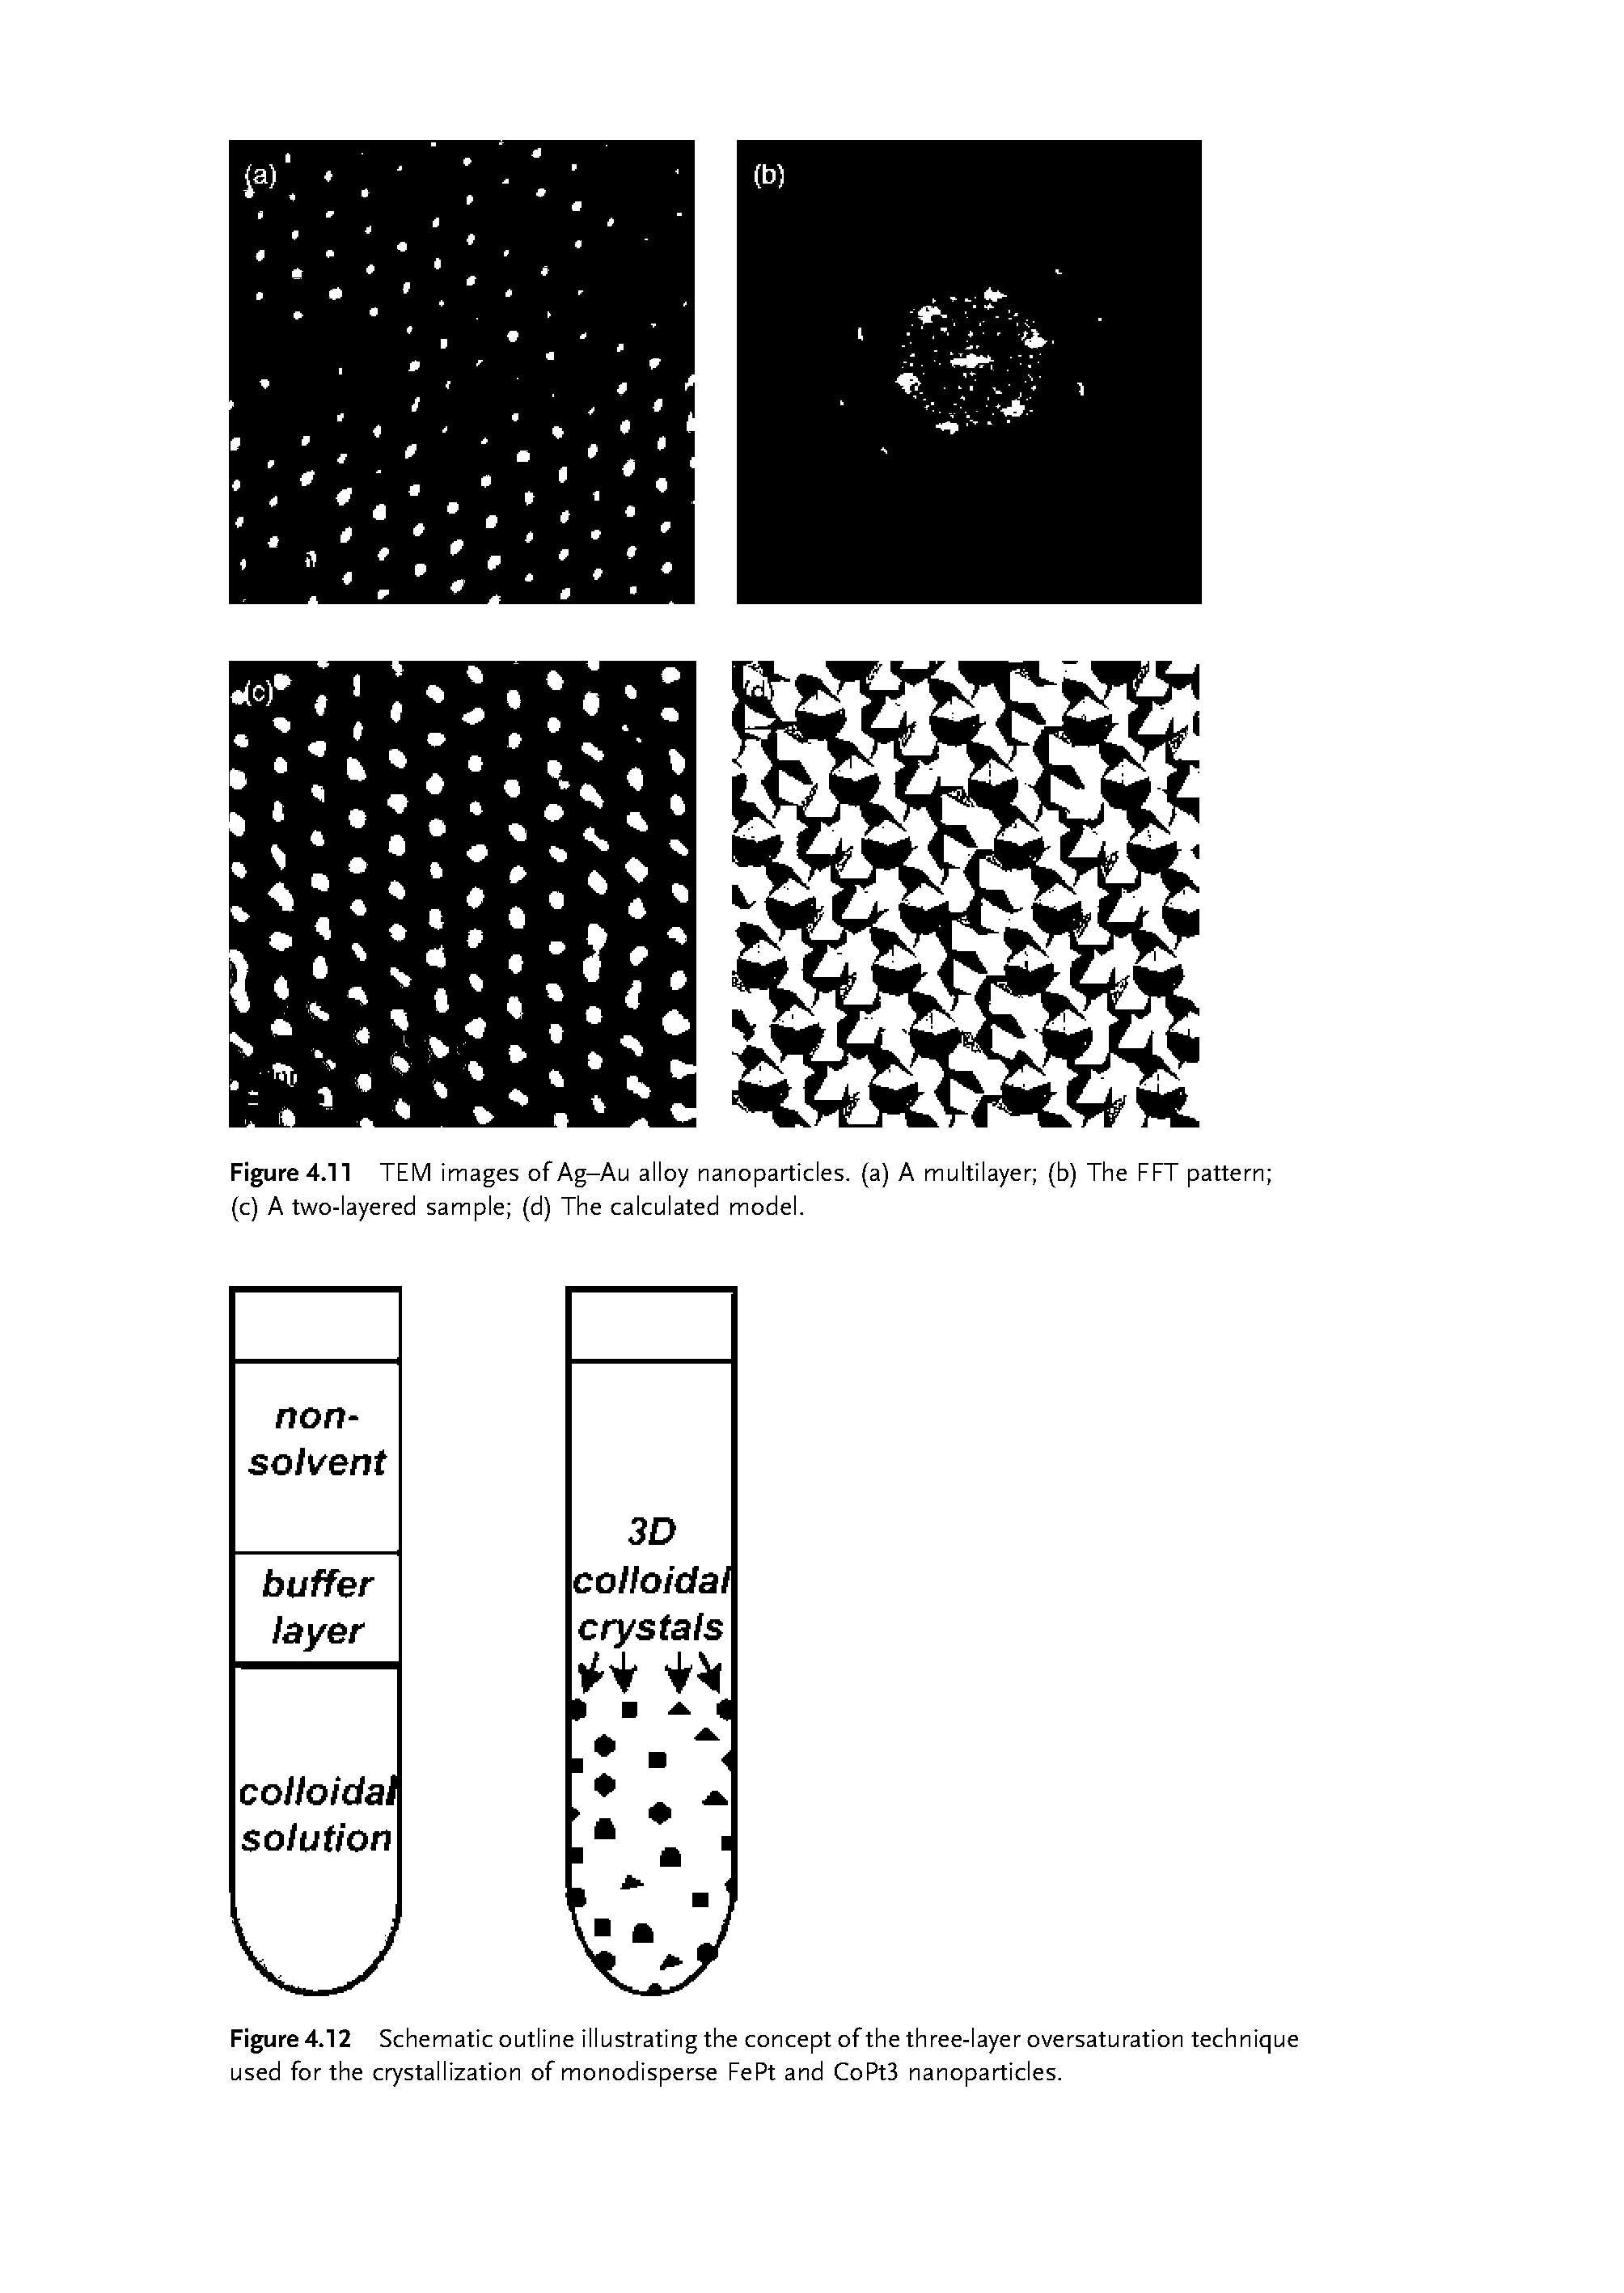 Figure 4.12 Schematic outline illustrating the concept of the three-layer oversaturation technique used for the crystallization of monodisperse FePt and CoPtS nanoparticles.